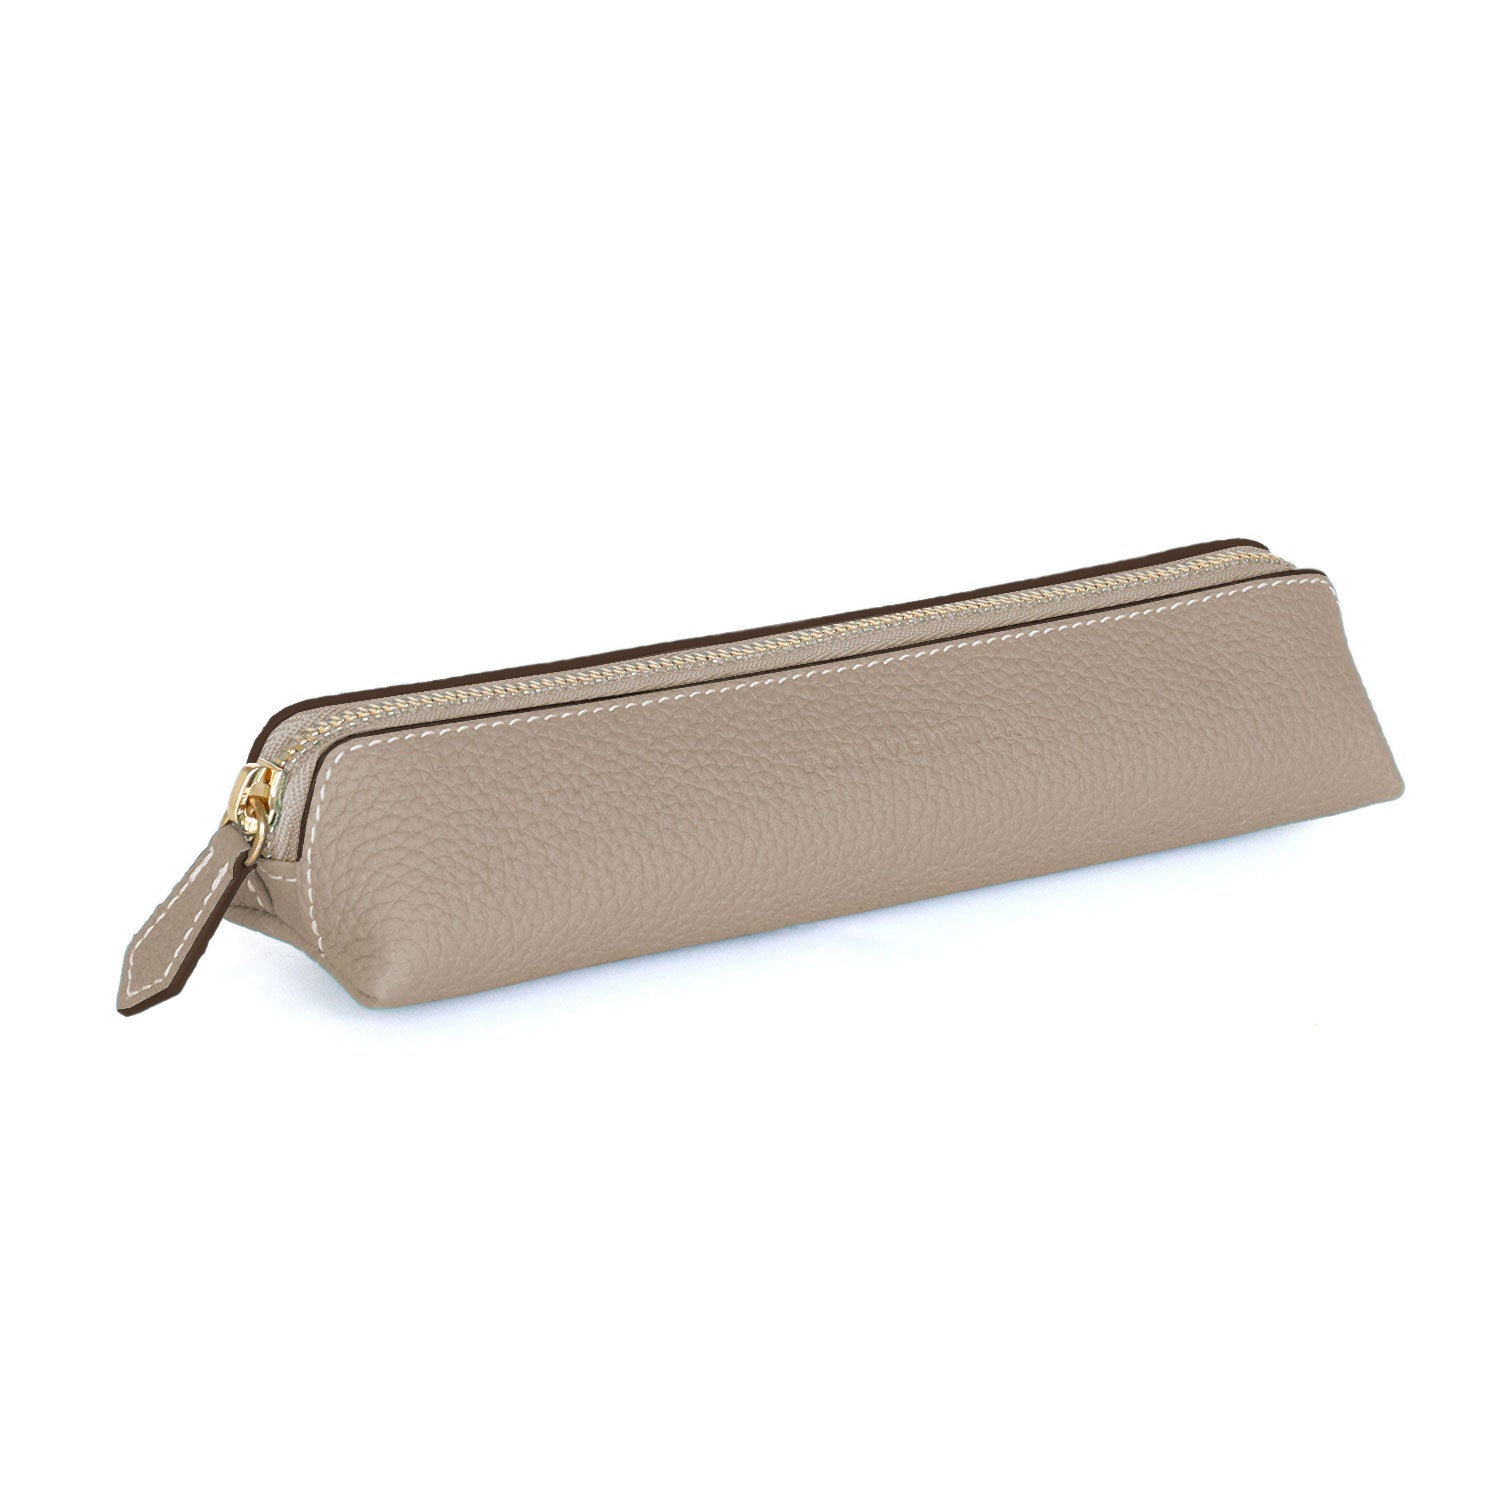 Pencil case in shrink leather